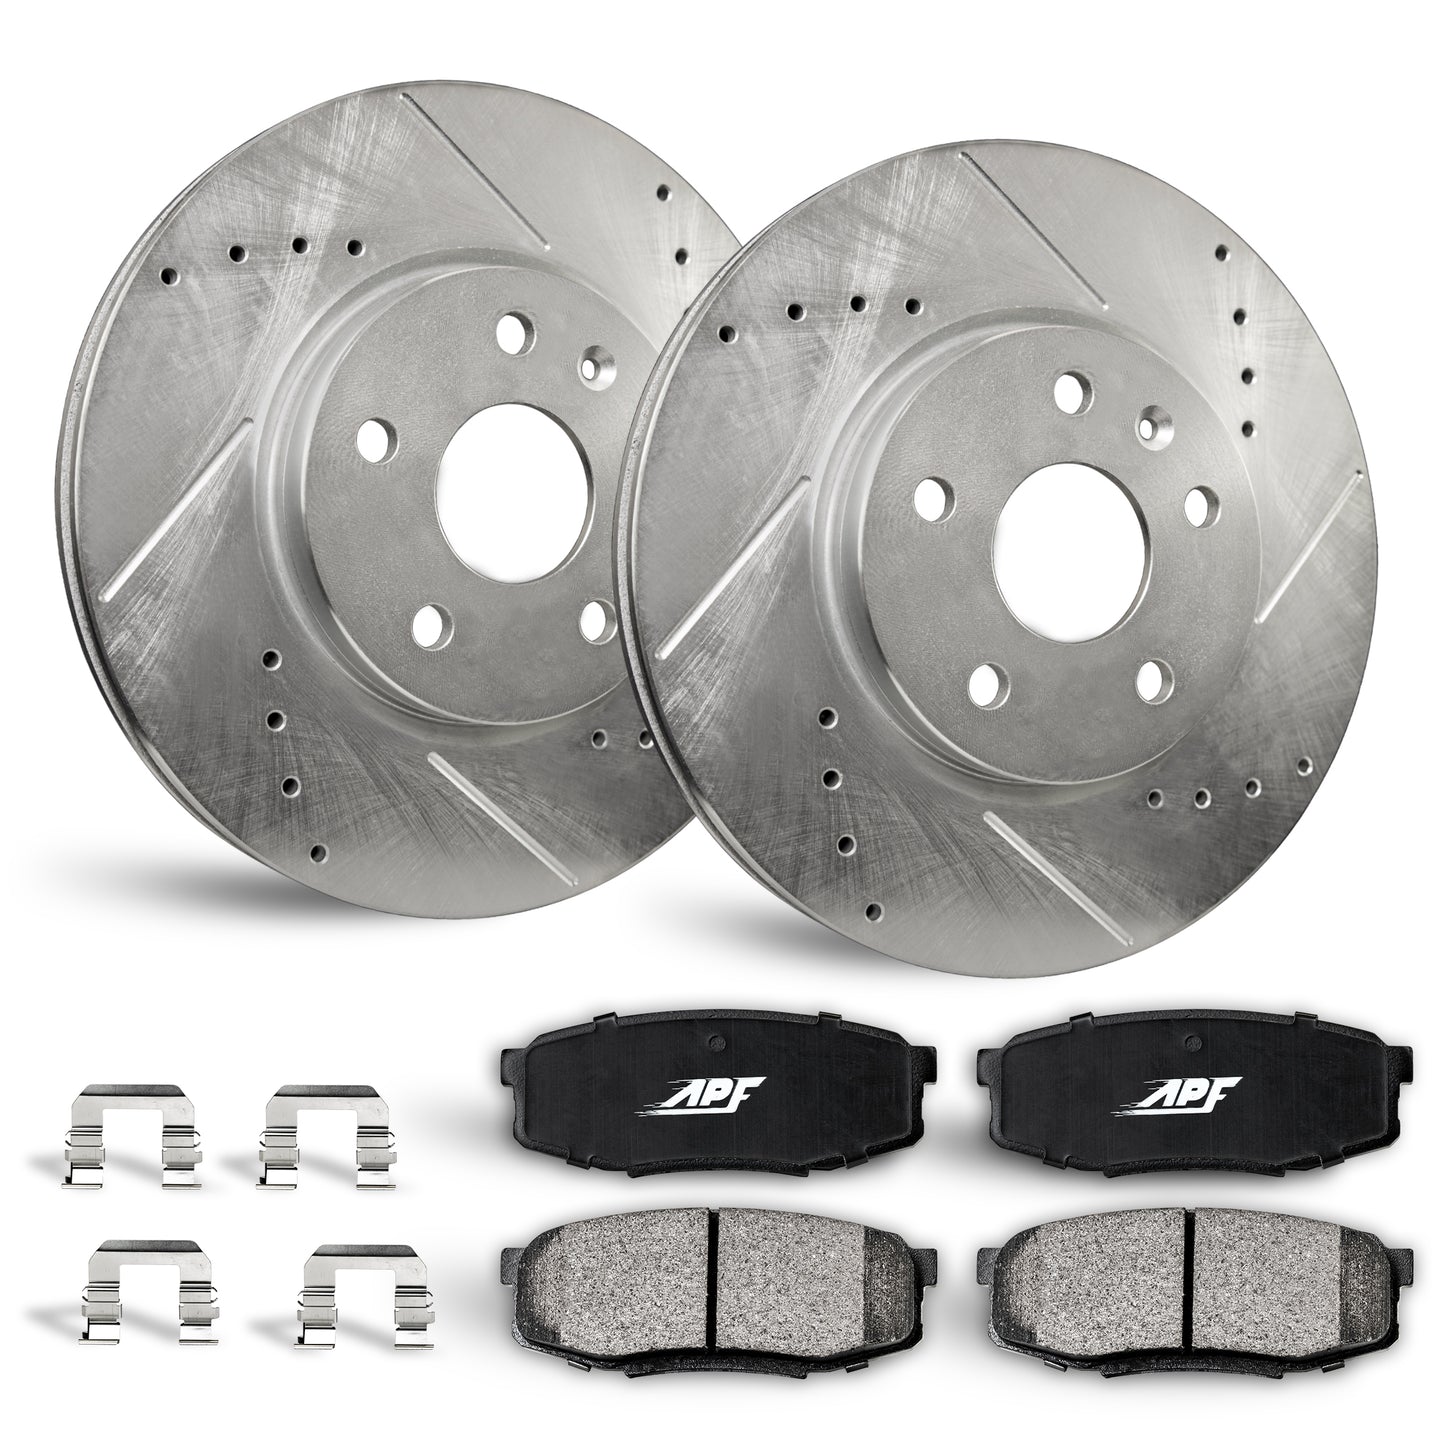 APF Rear Brake Kit compatible with Buick LaCrosse 2012-2016 | Zinc Drilled Slotted Rotors with Ceramic Carbon Fiber Brake Pads